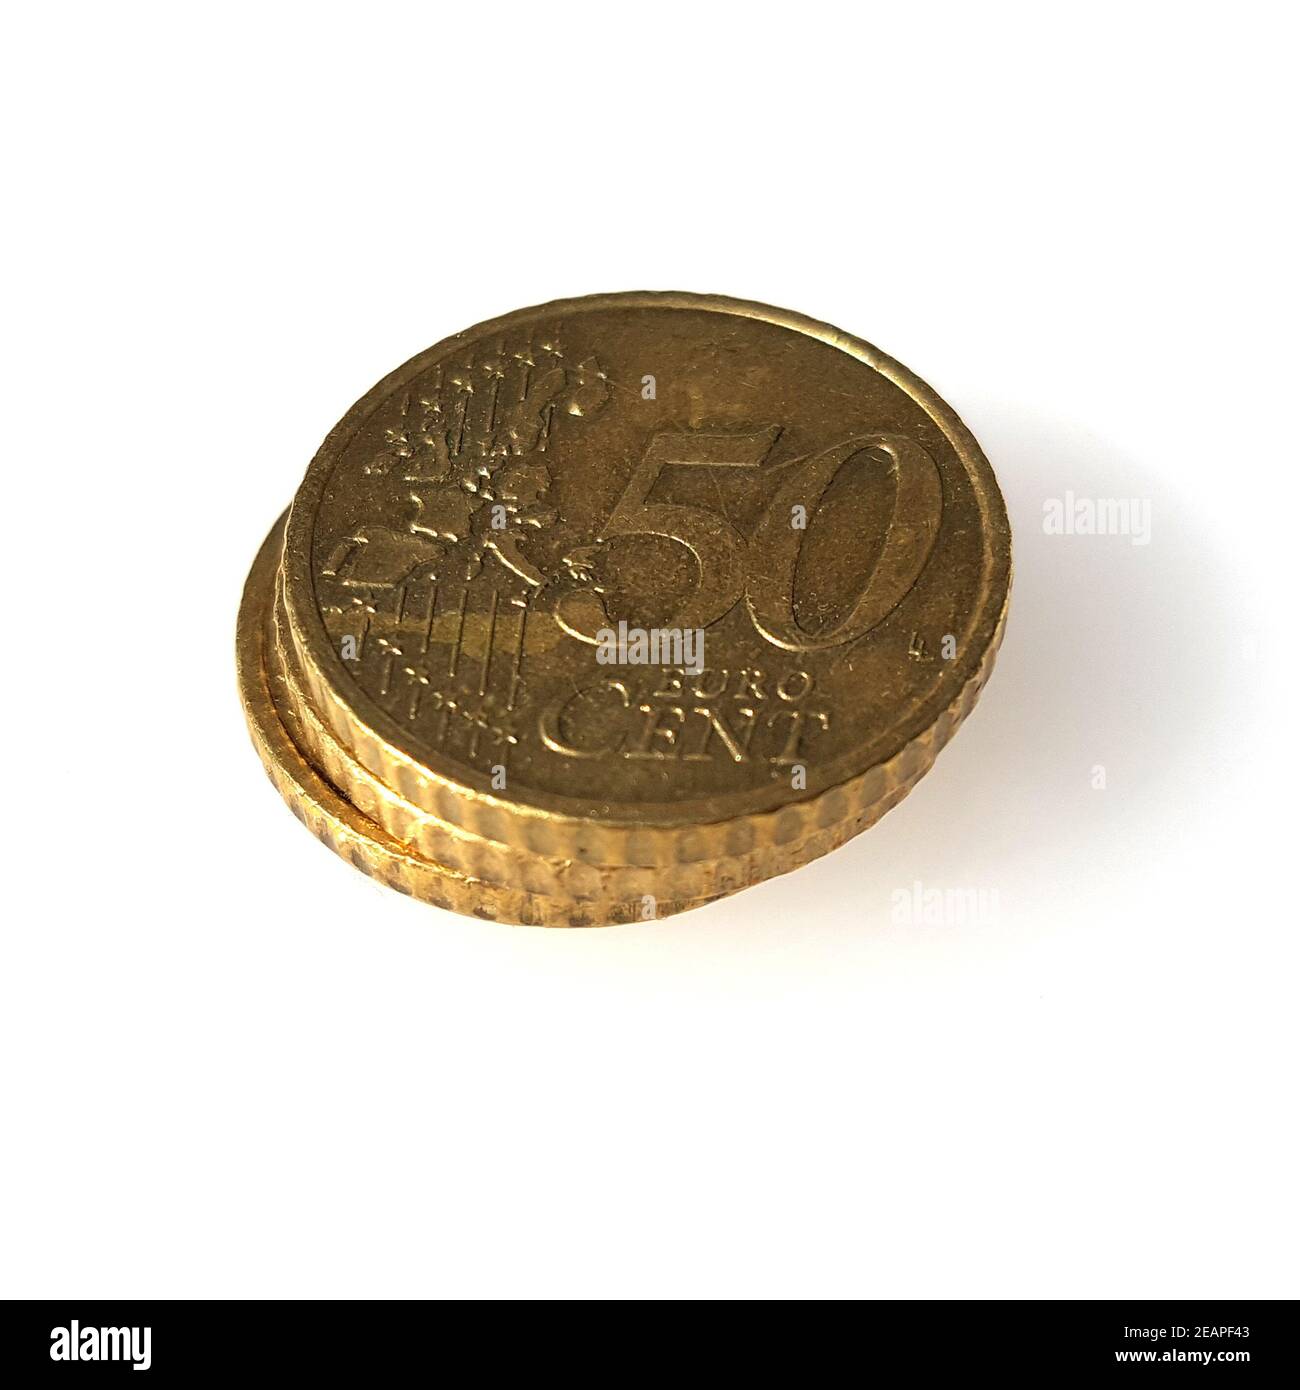 10,374 1 Cent Euro Coin Images, Stock Photos, 3D objects, & Vectors